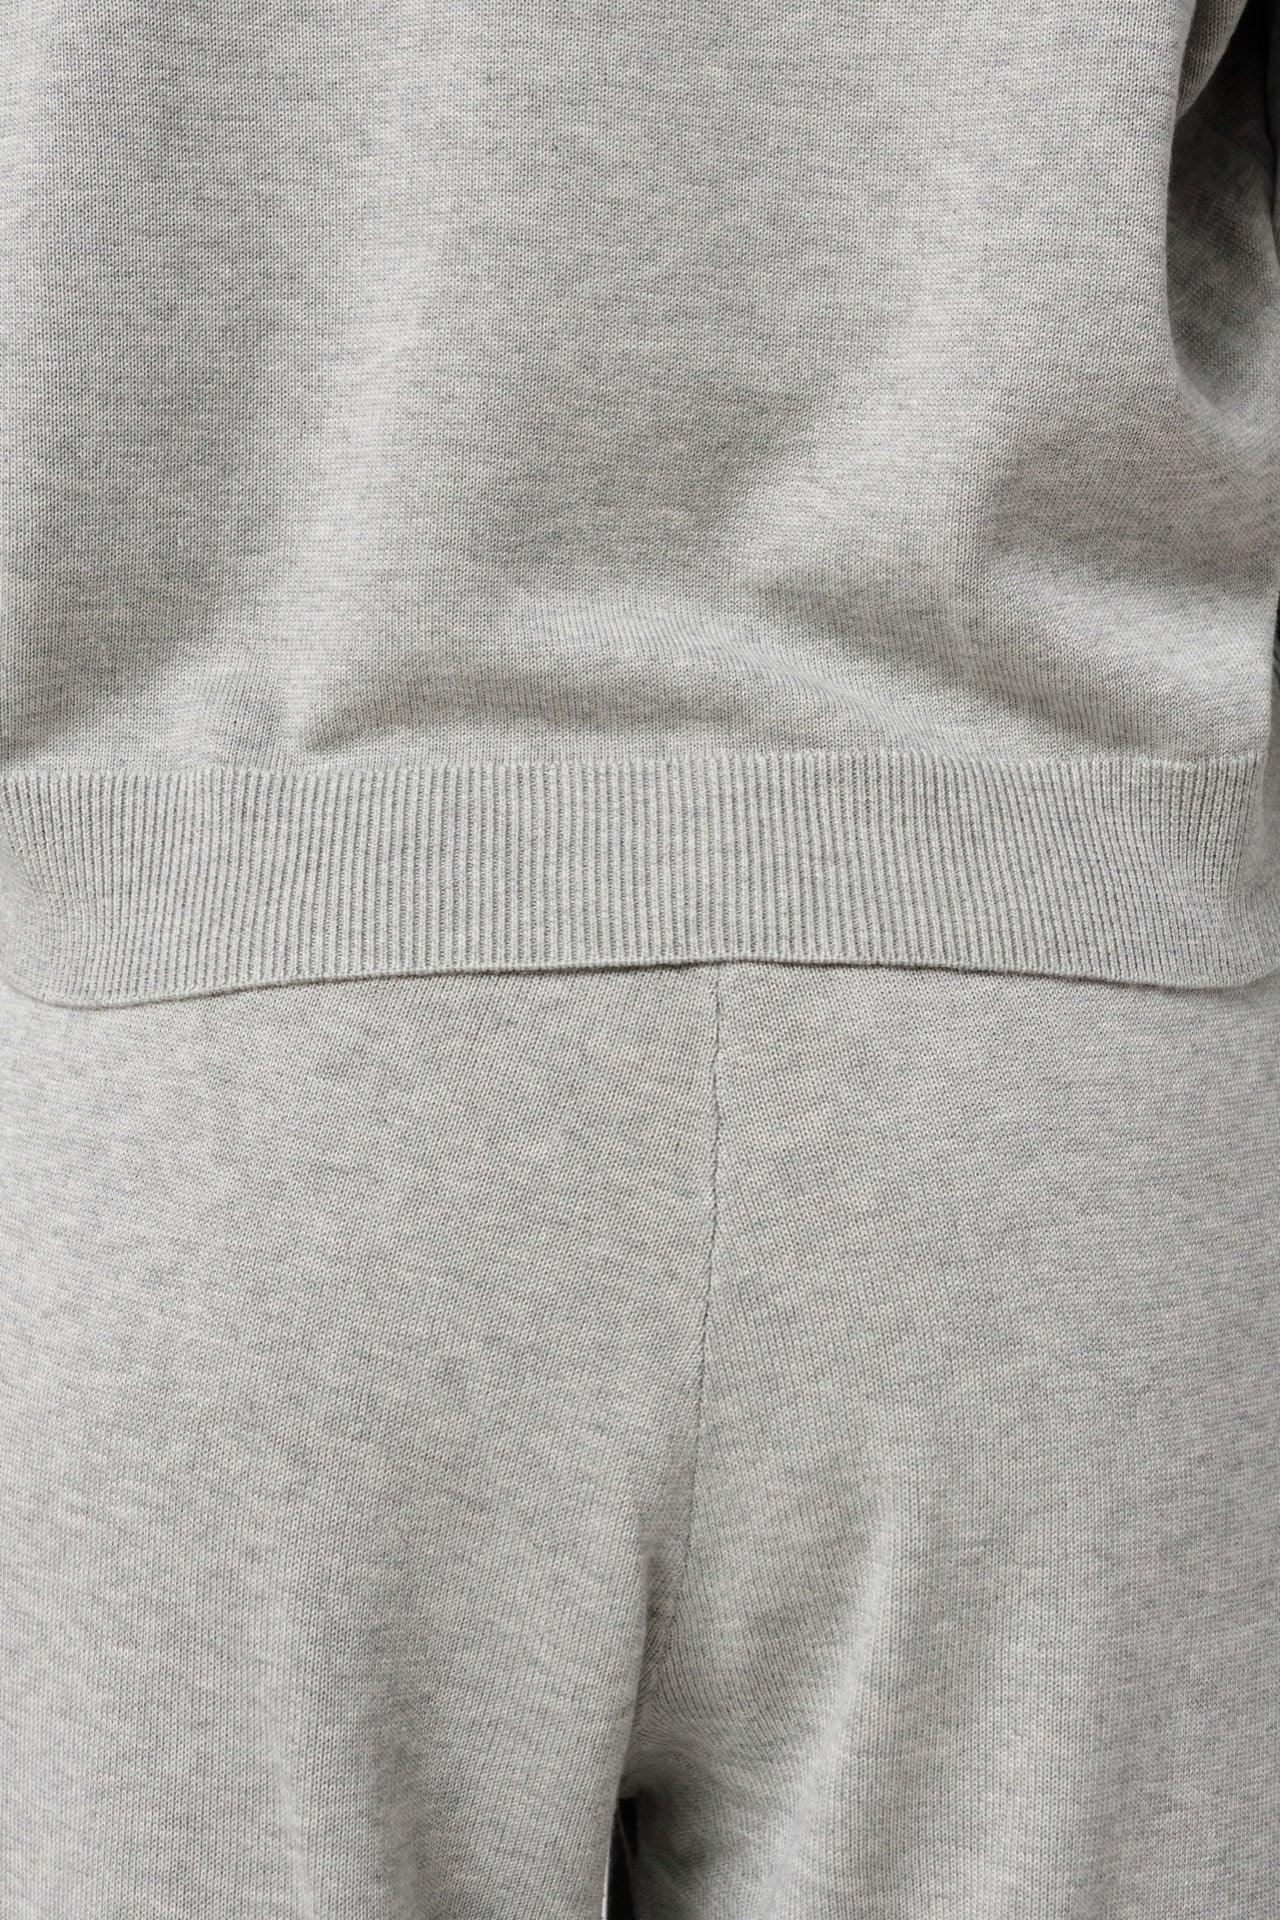 Women's Cropped Sweater - NOT LABELED